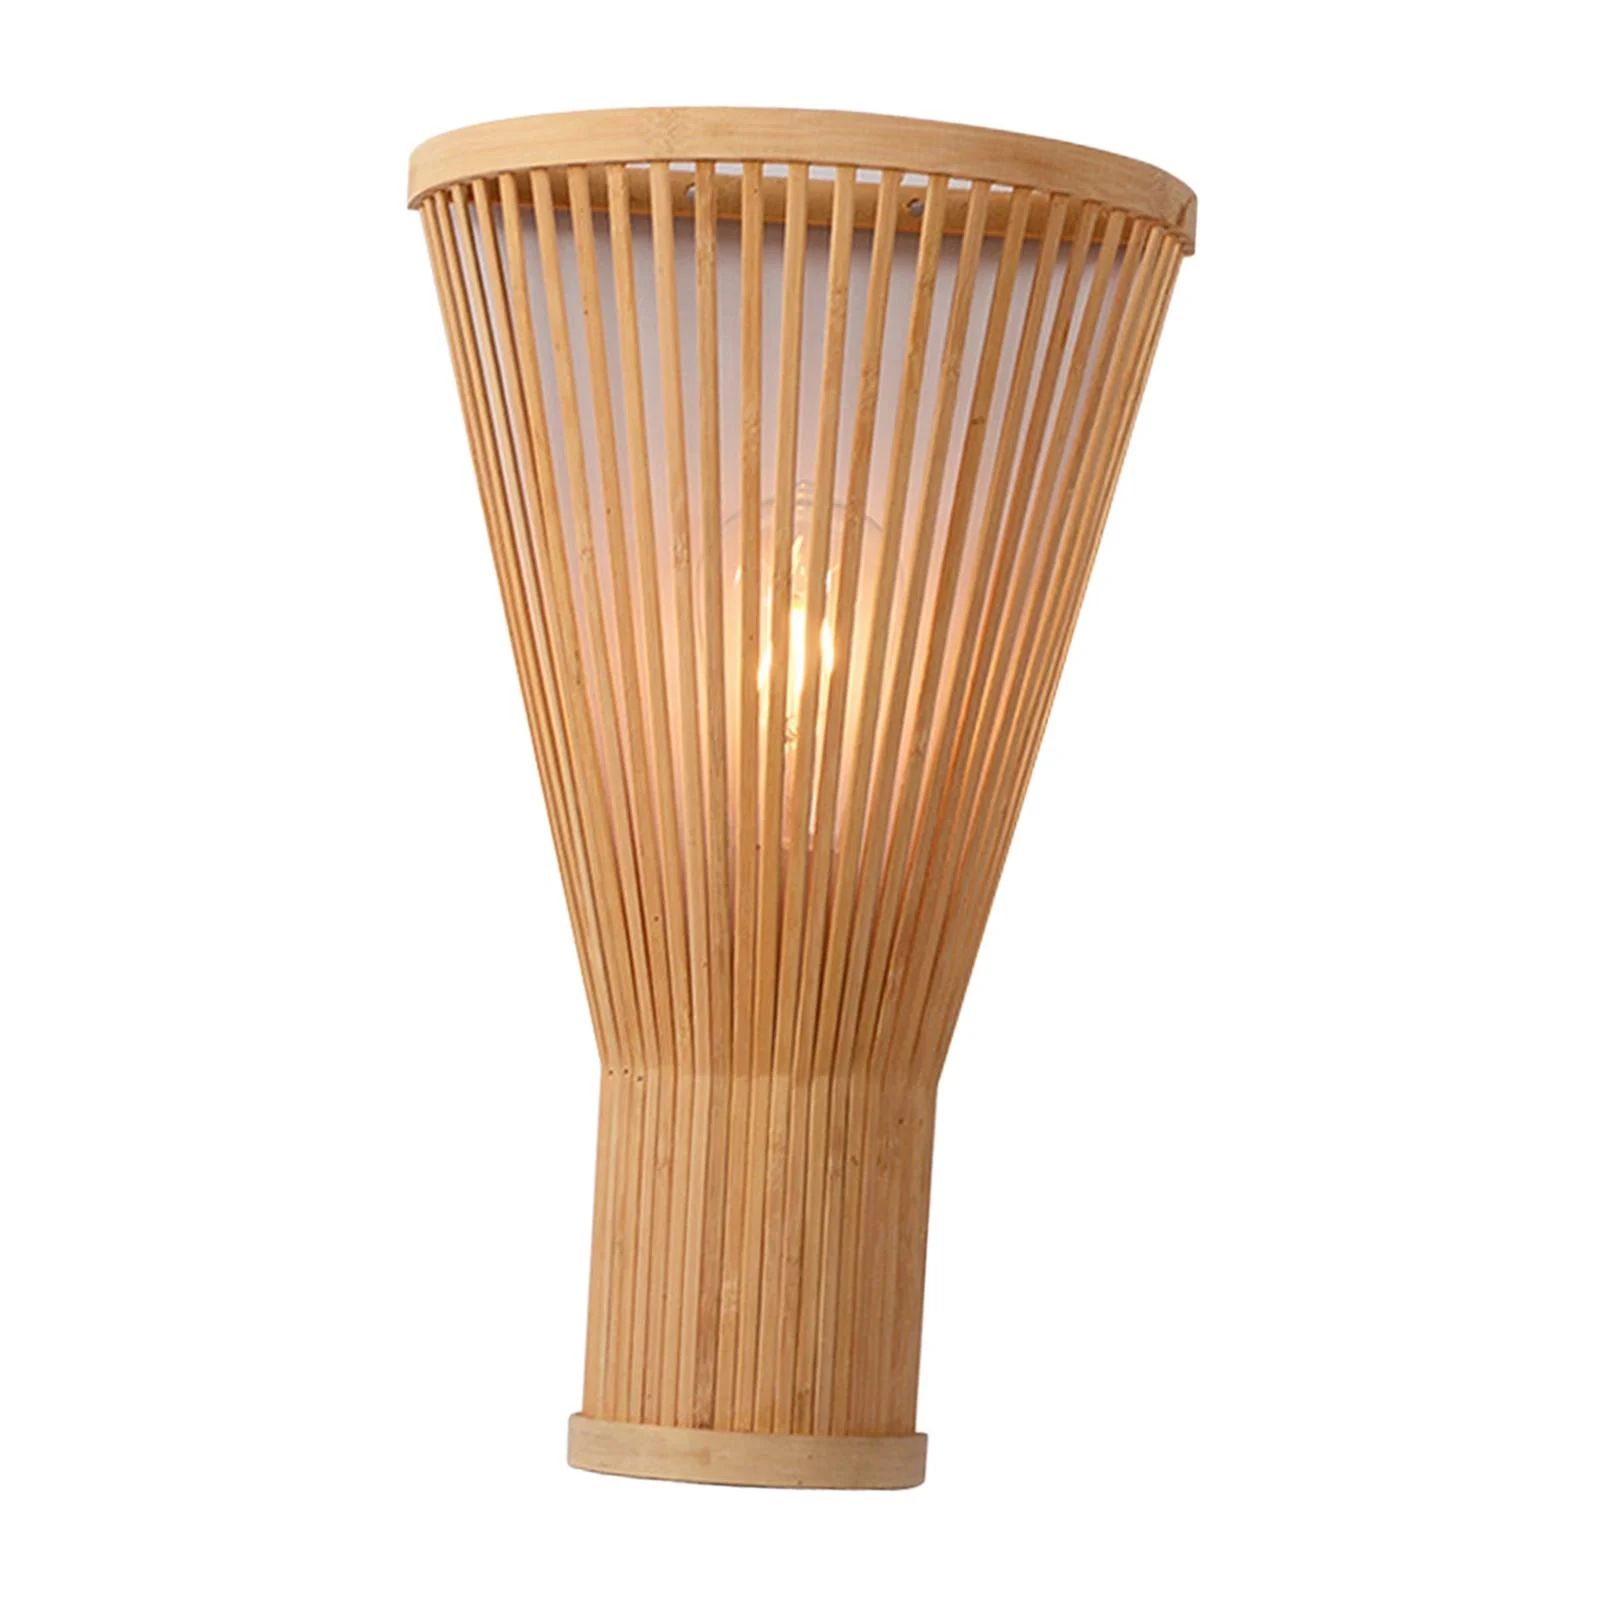 Retro Bamboo Wickert Wall Lamp Sconce Woven LED Wall Light for Kitchen Decor | Walmart (US)